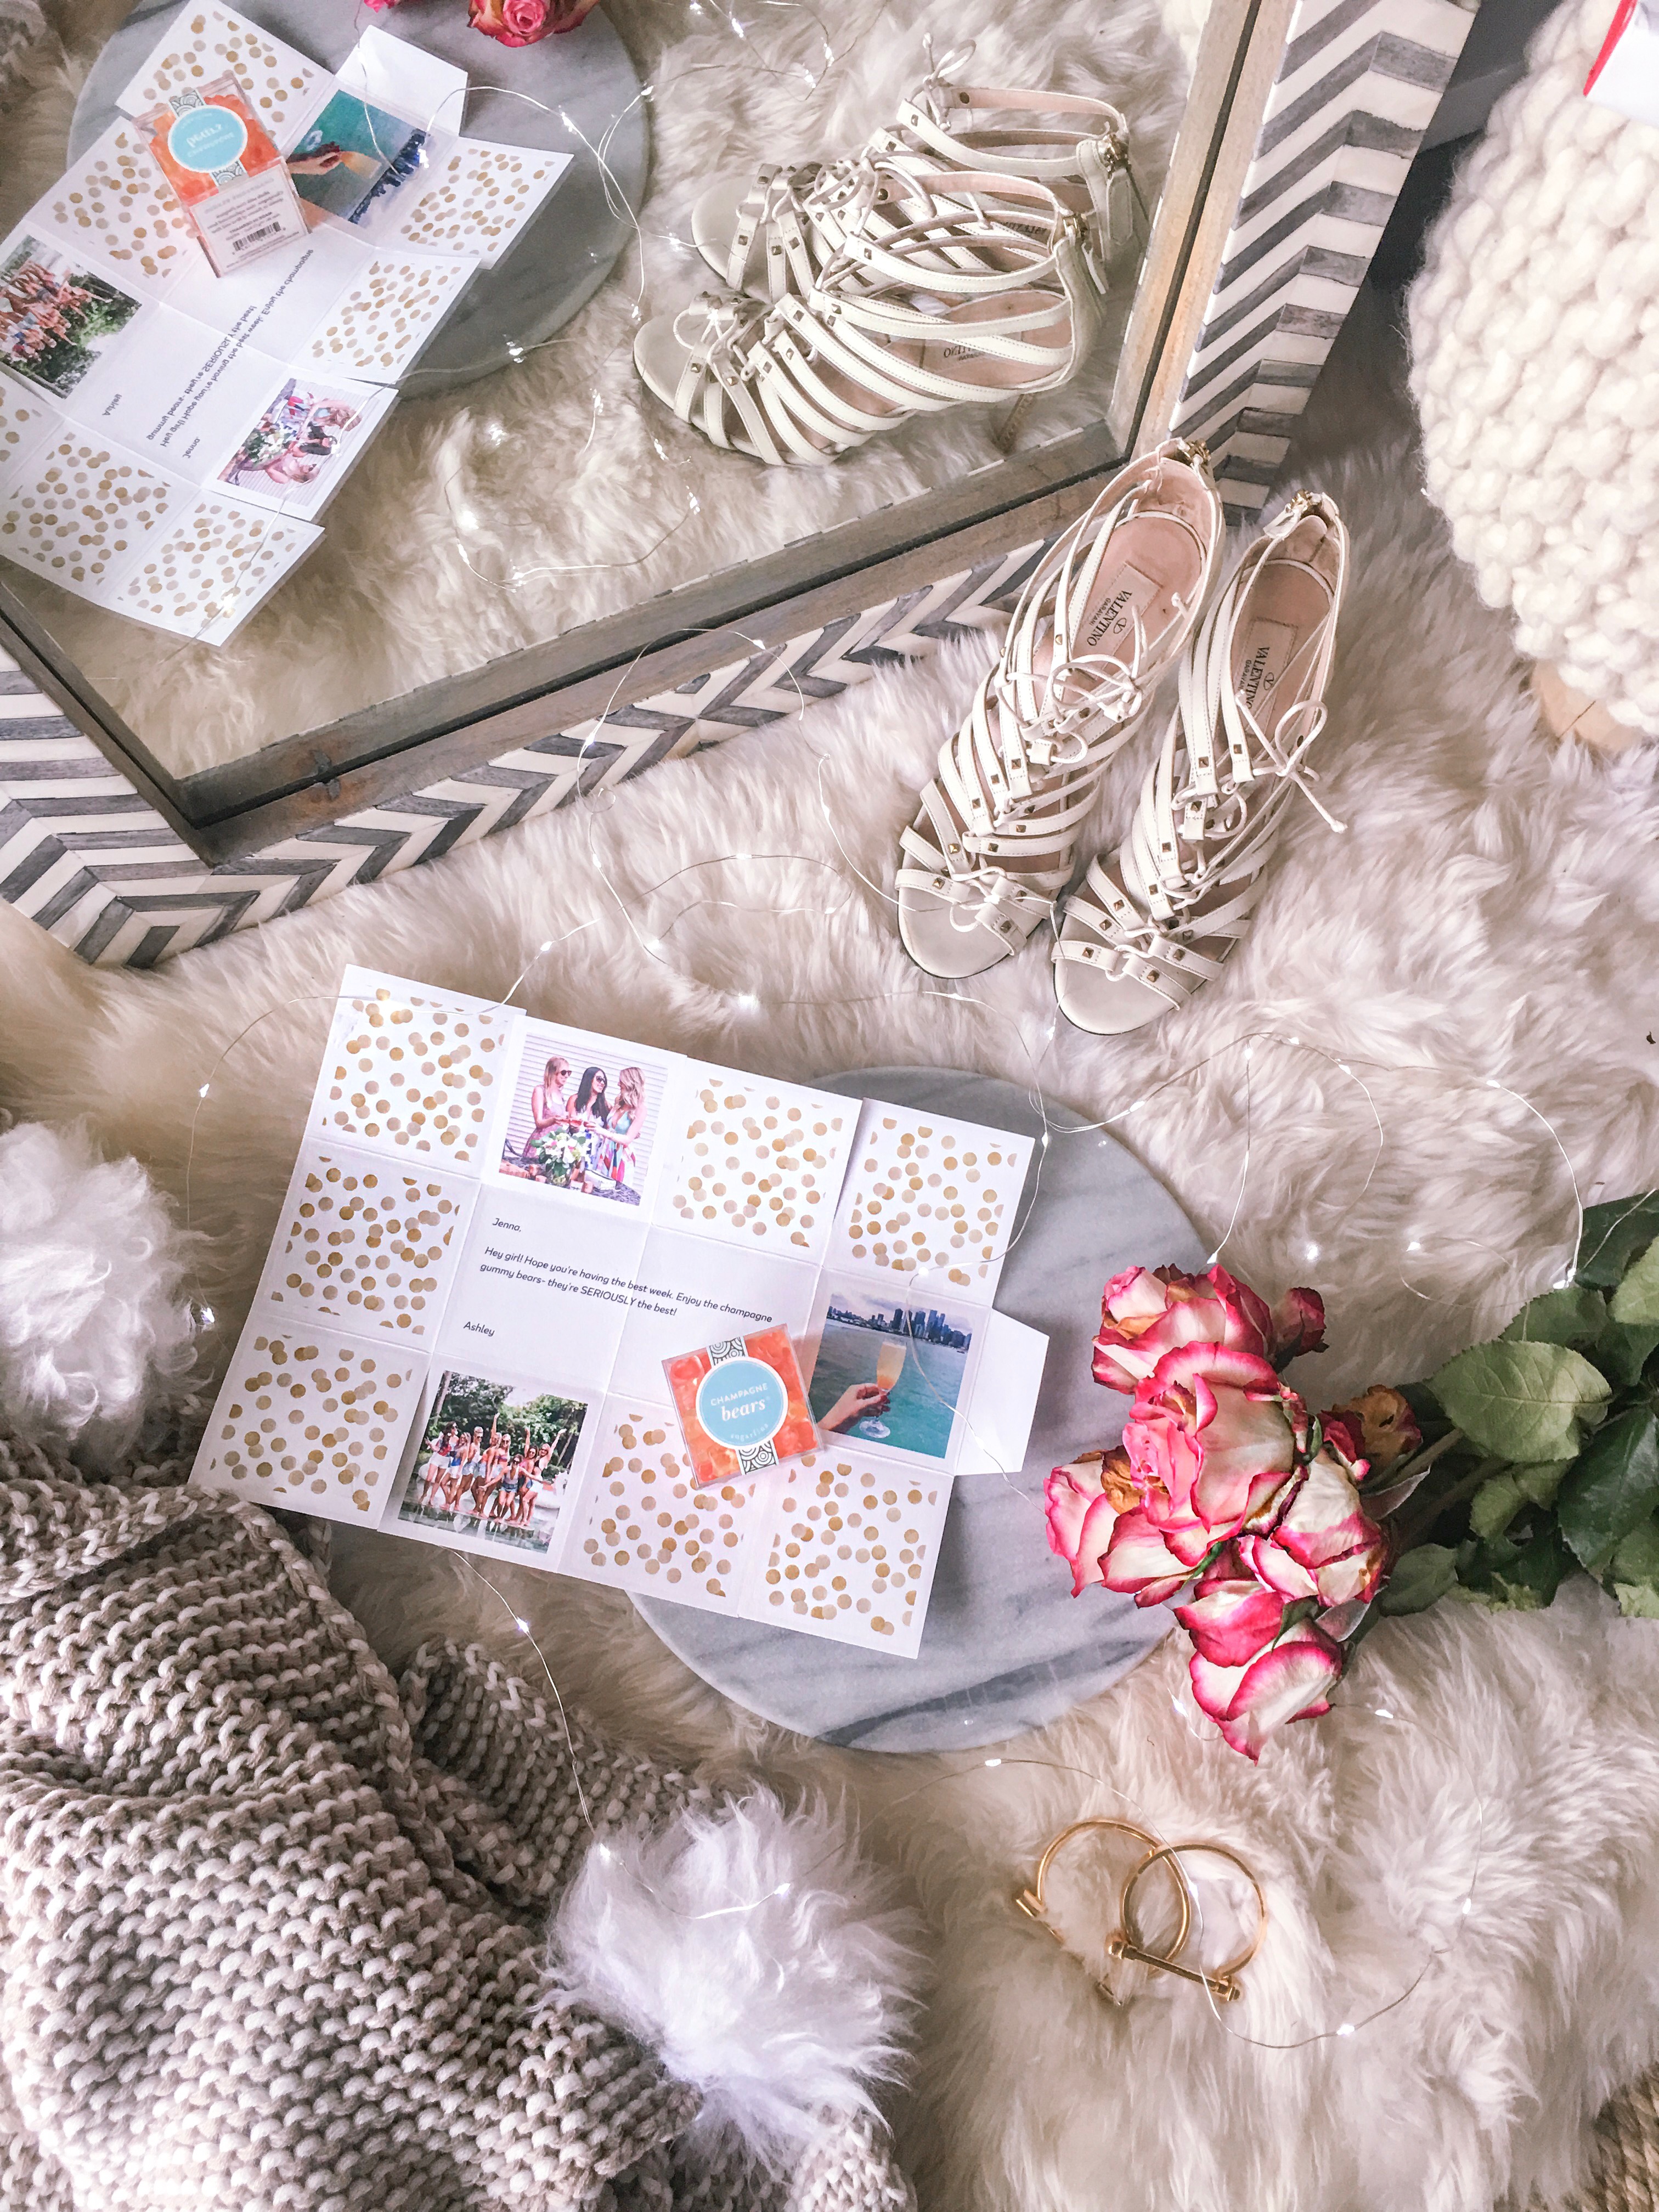 affordable and easy gift ideas - personalized gift boxes with greentabl by Chicago style blogger Visions of Vogue